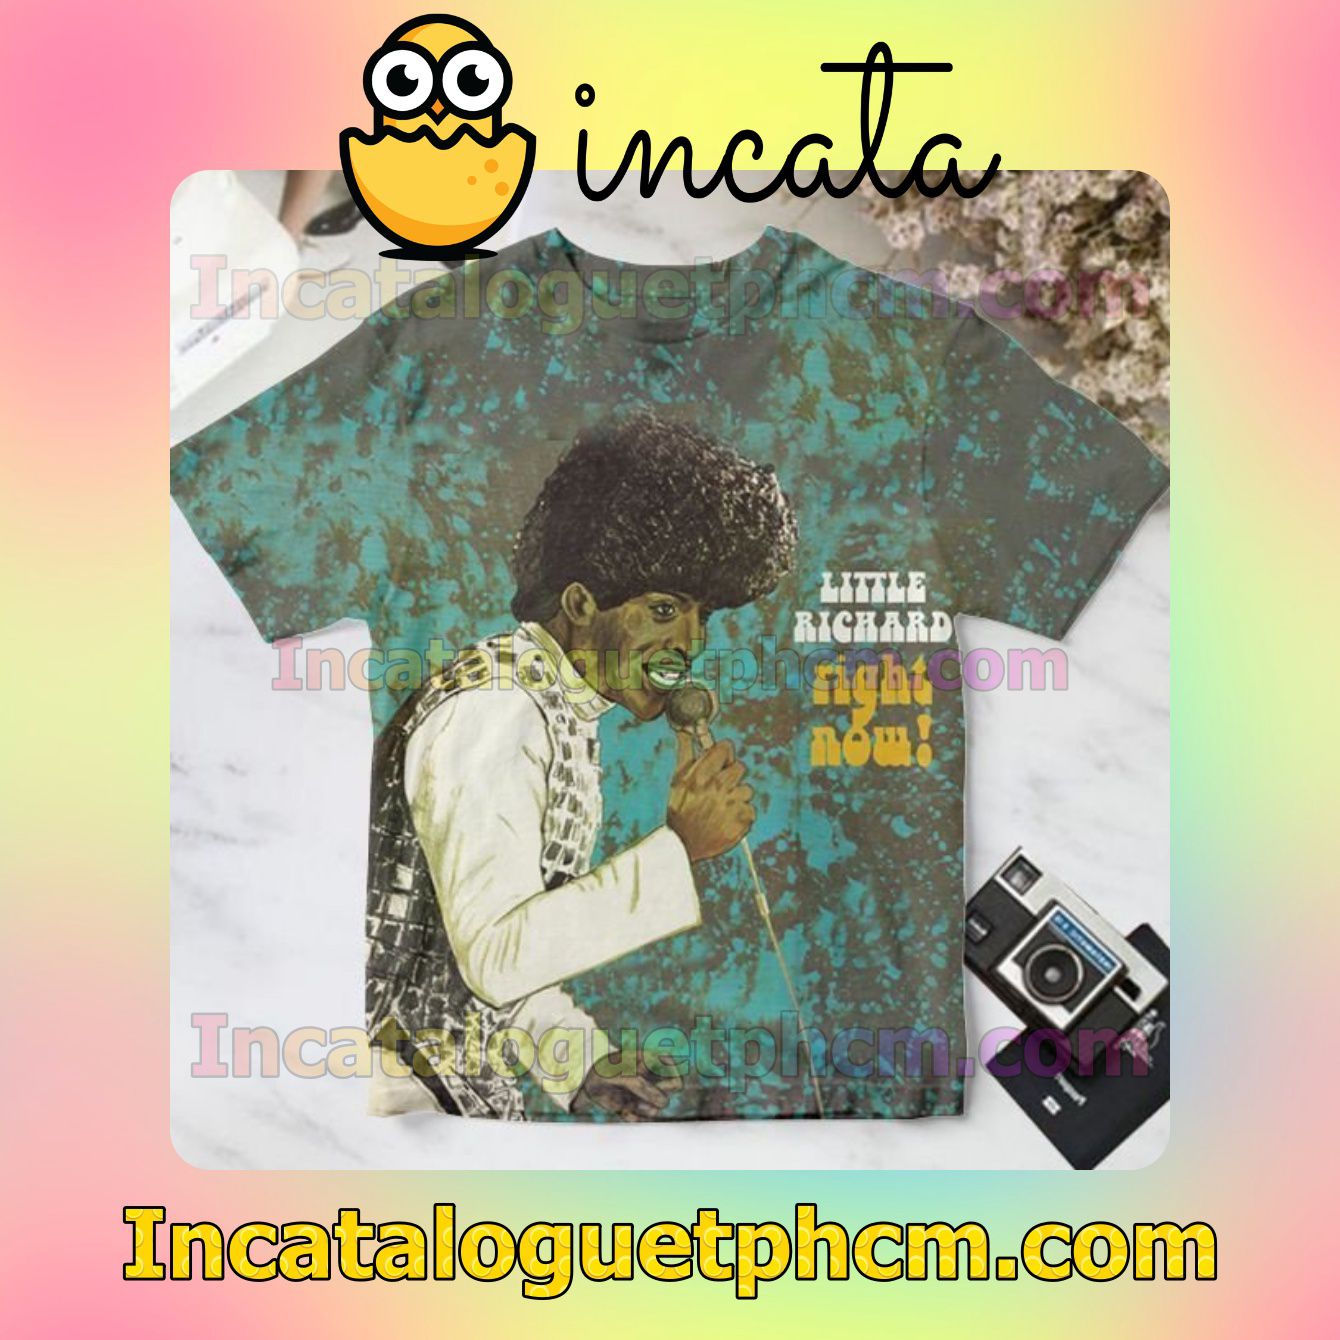 Little Richard Right Now Album Cover Personalized Shirt